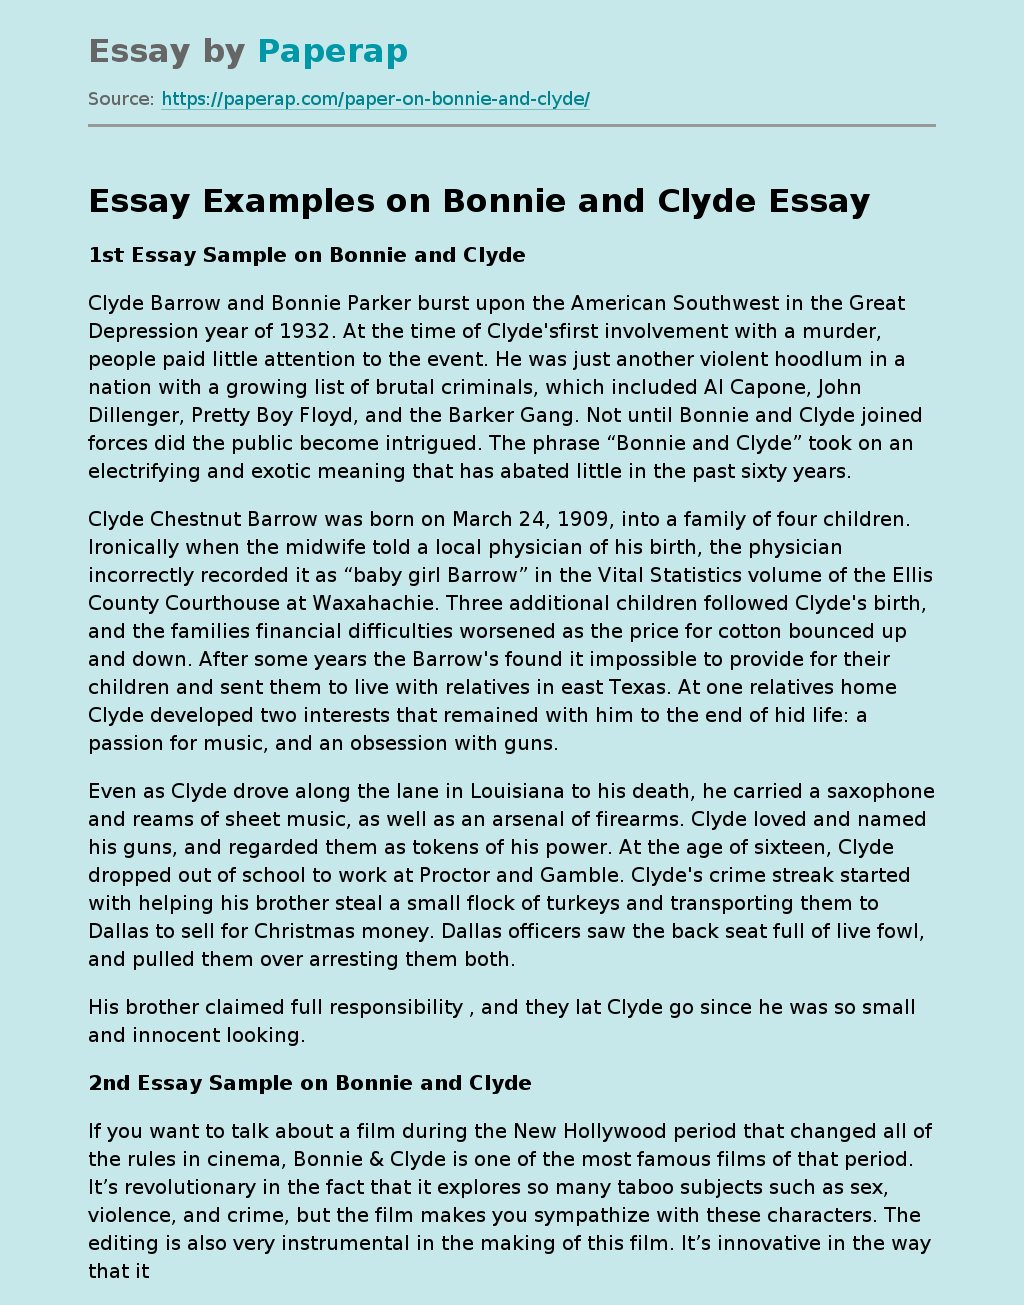 Essay Examples on Bonnie and Clyde